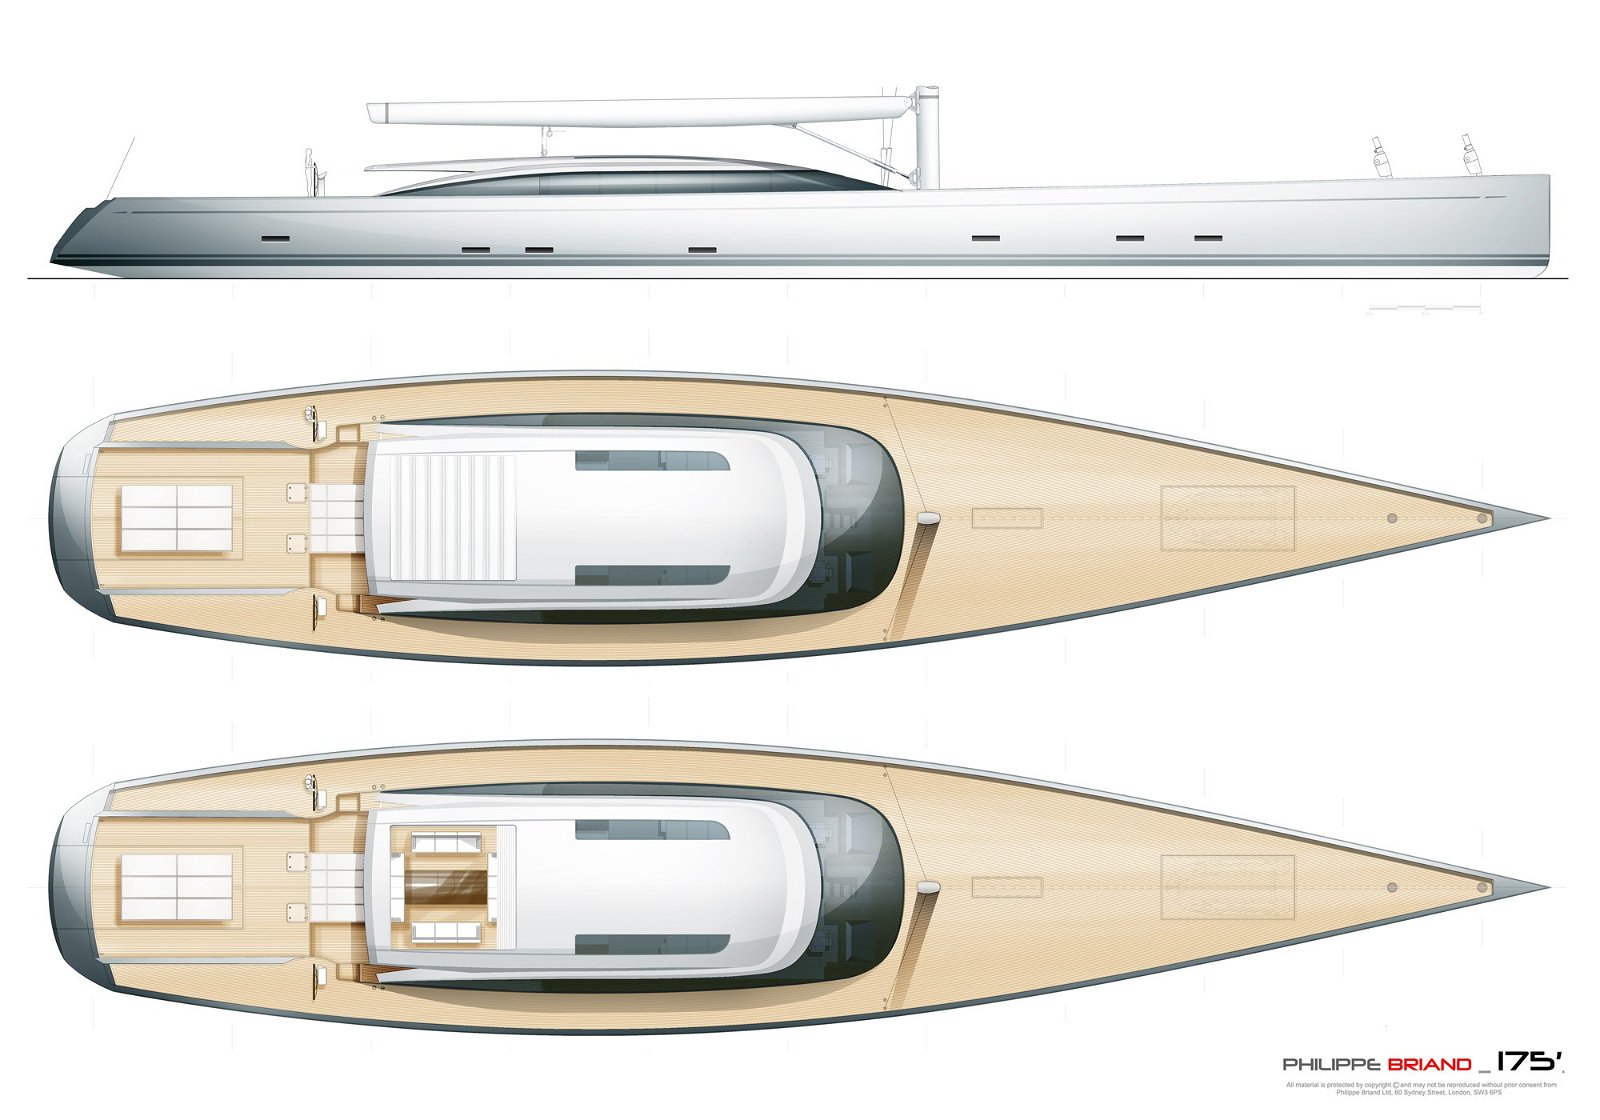 175'_HT SLOOP PROFILE AND PLAN VIEW_15062011